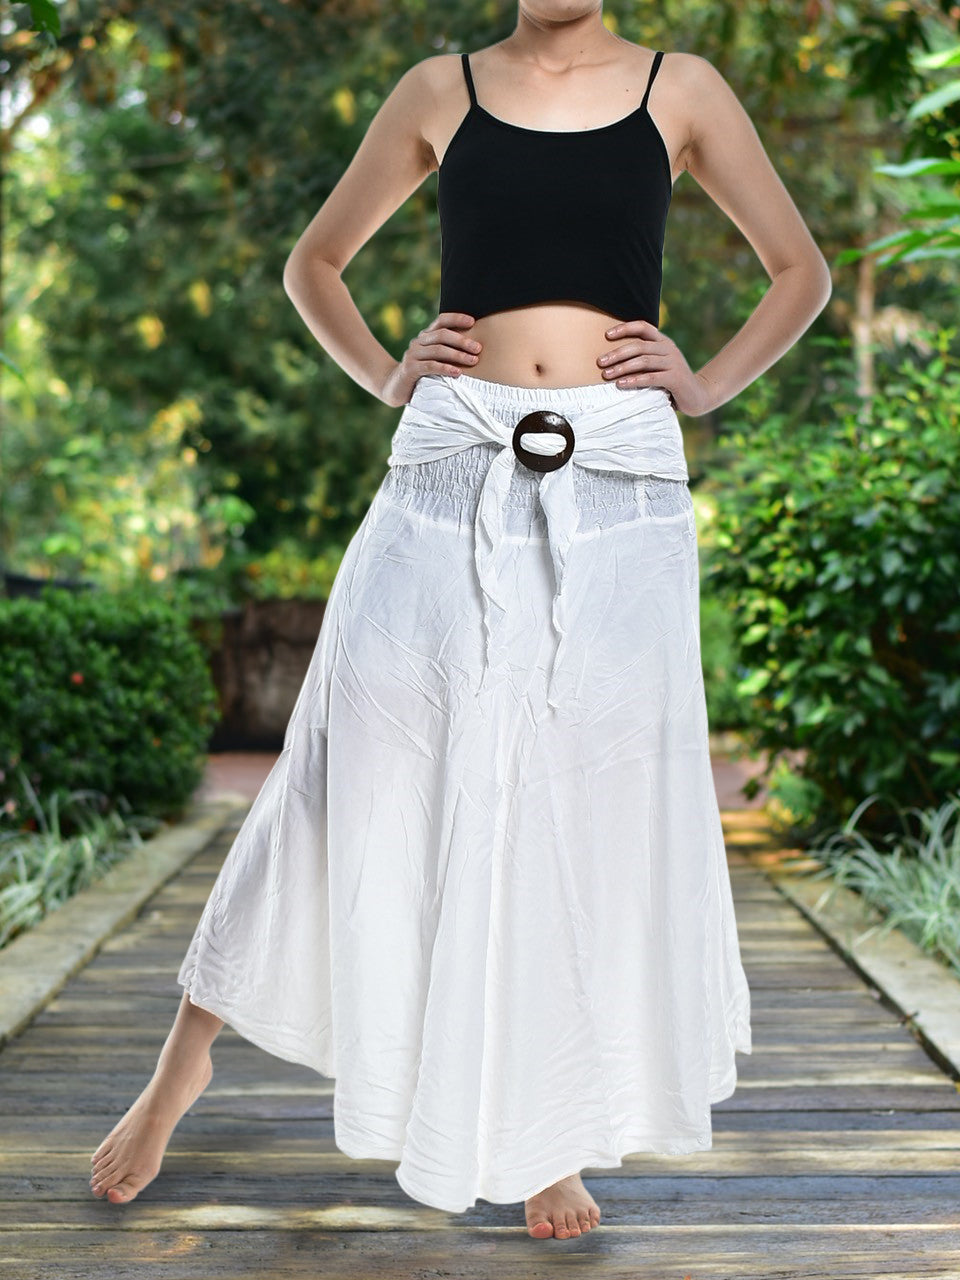 Bohotusk Plain White Long Skirt With Coconut Buckle (& Strapless Dress) S/M to 3XL